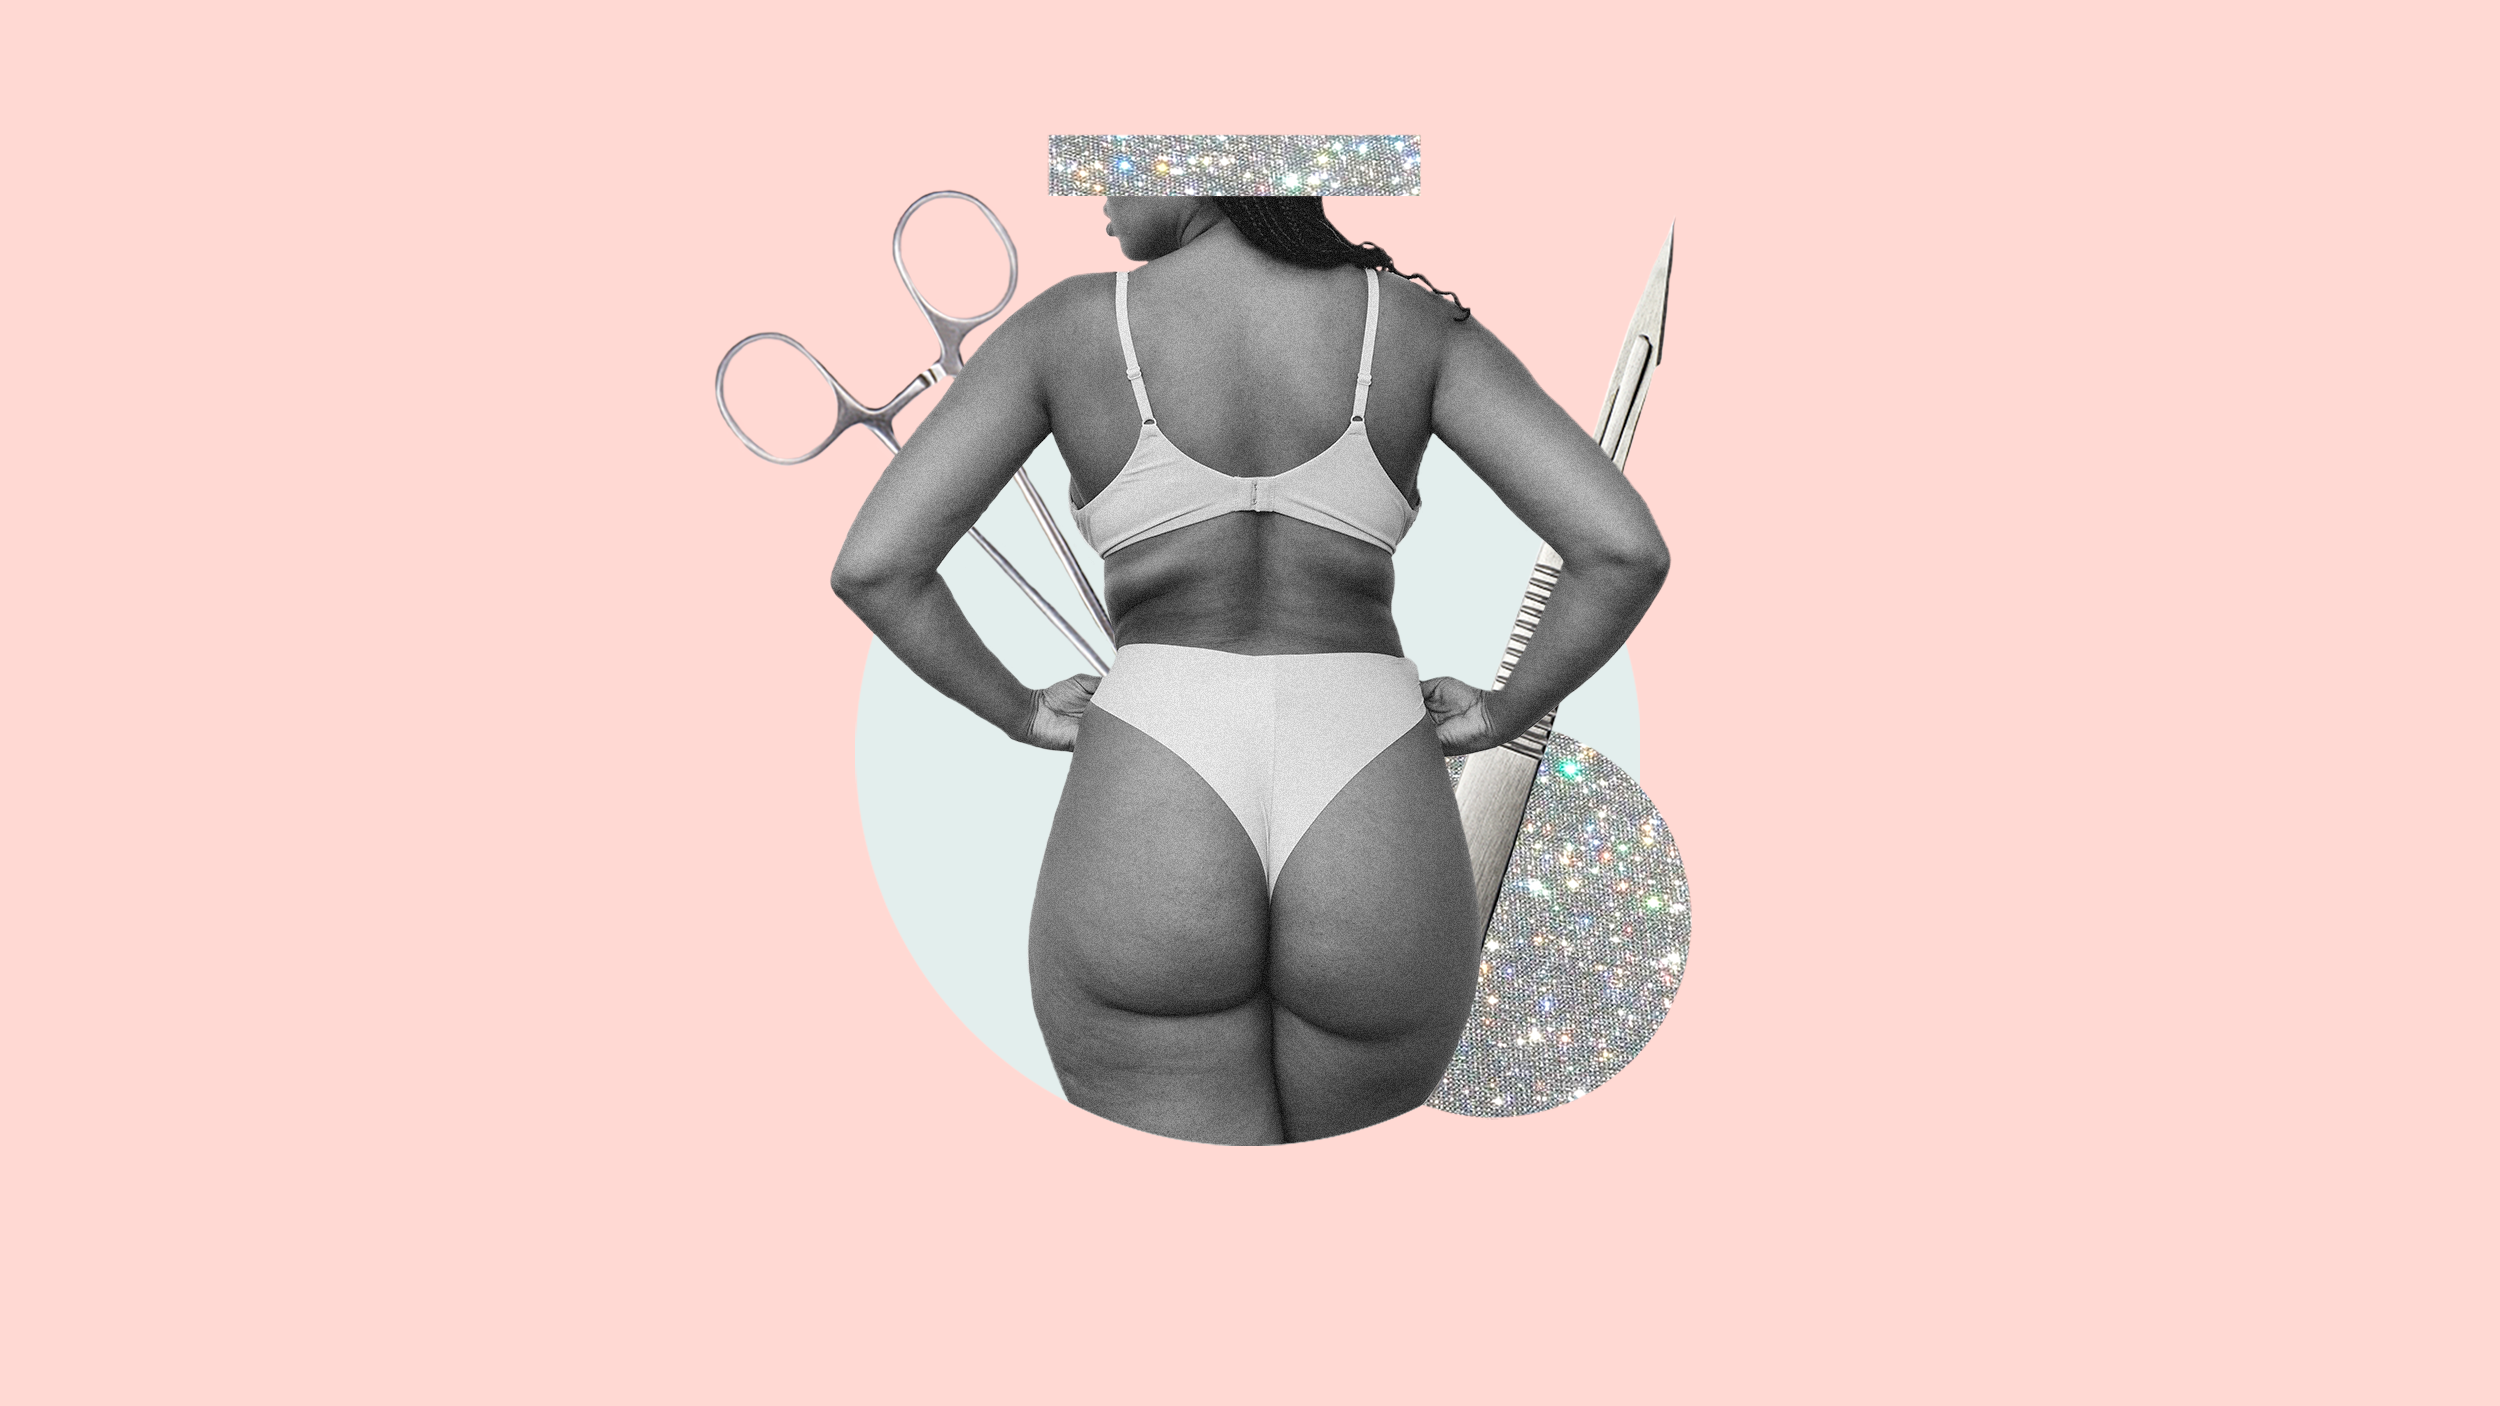 Brazilian Butt Lift: what is a BBL and how much does it cost?